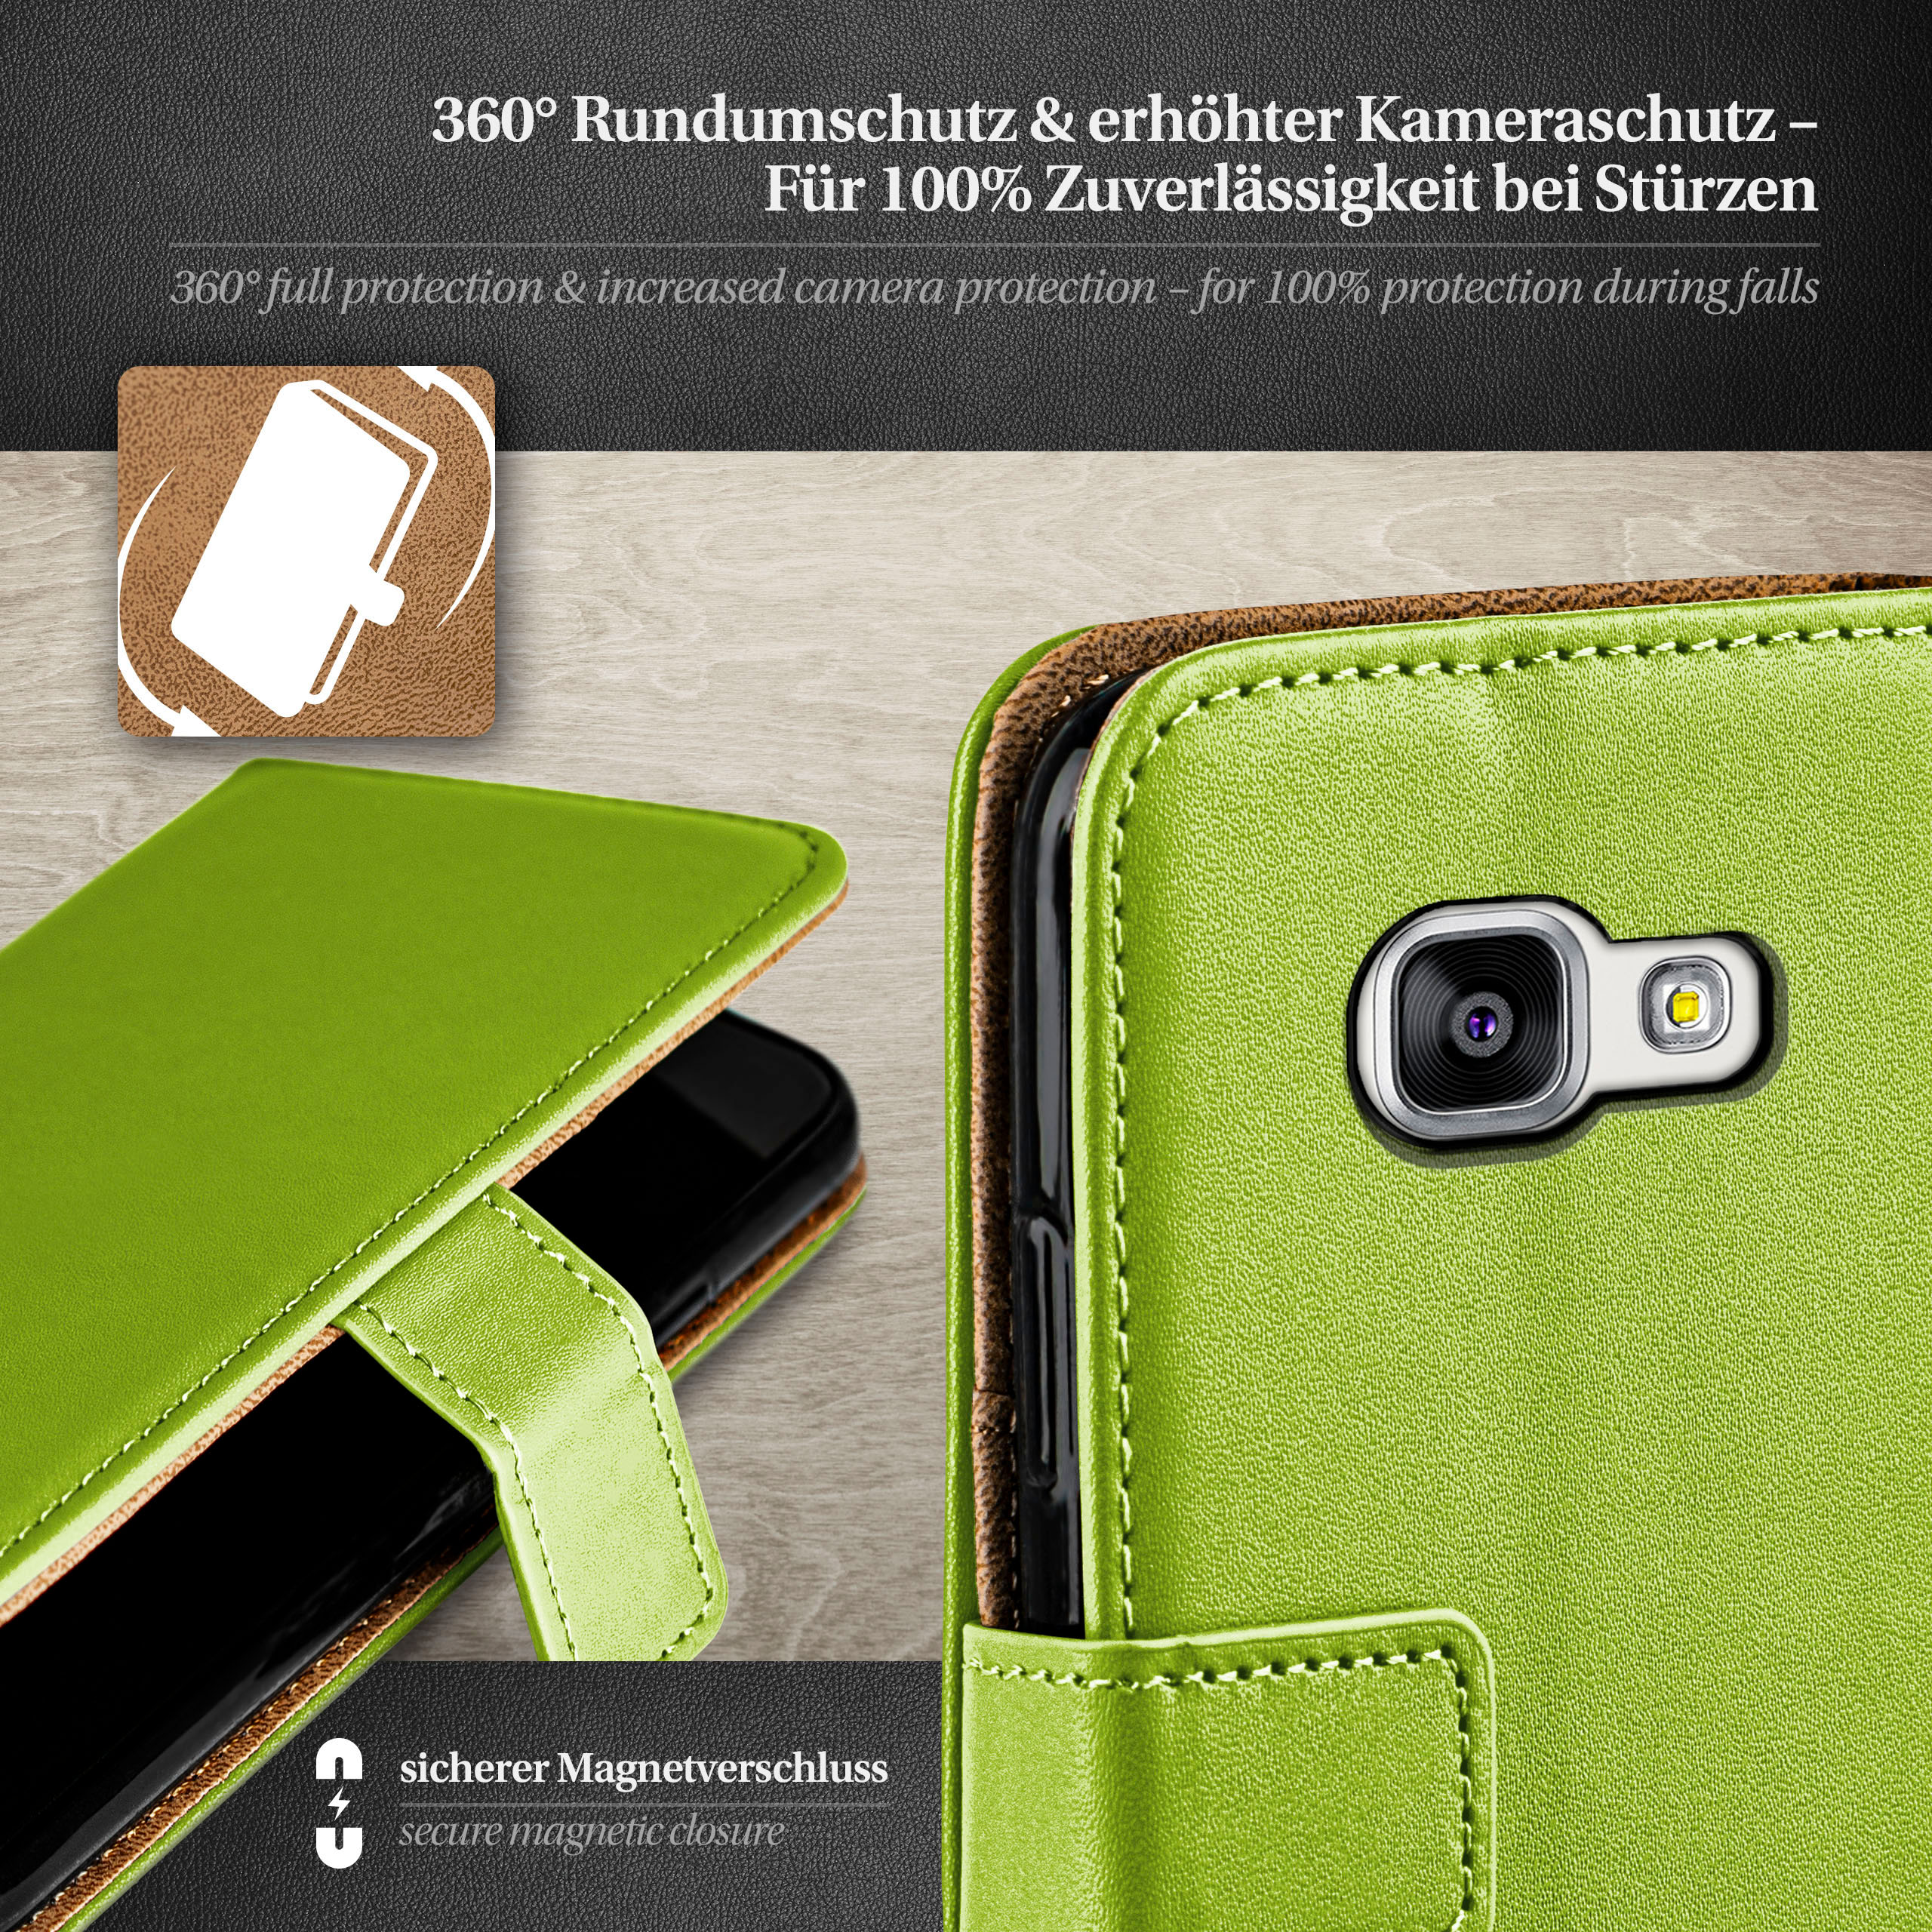 Bookcover, A3 (2016), Book Samsung, MOEX Case, Lime-Green Galaxy